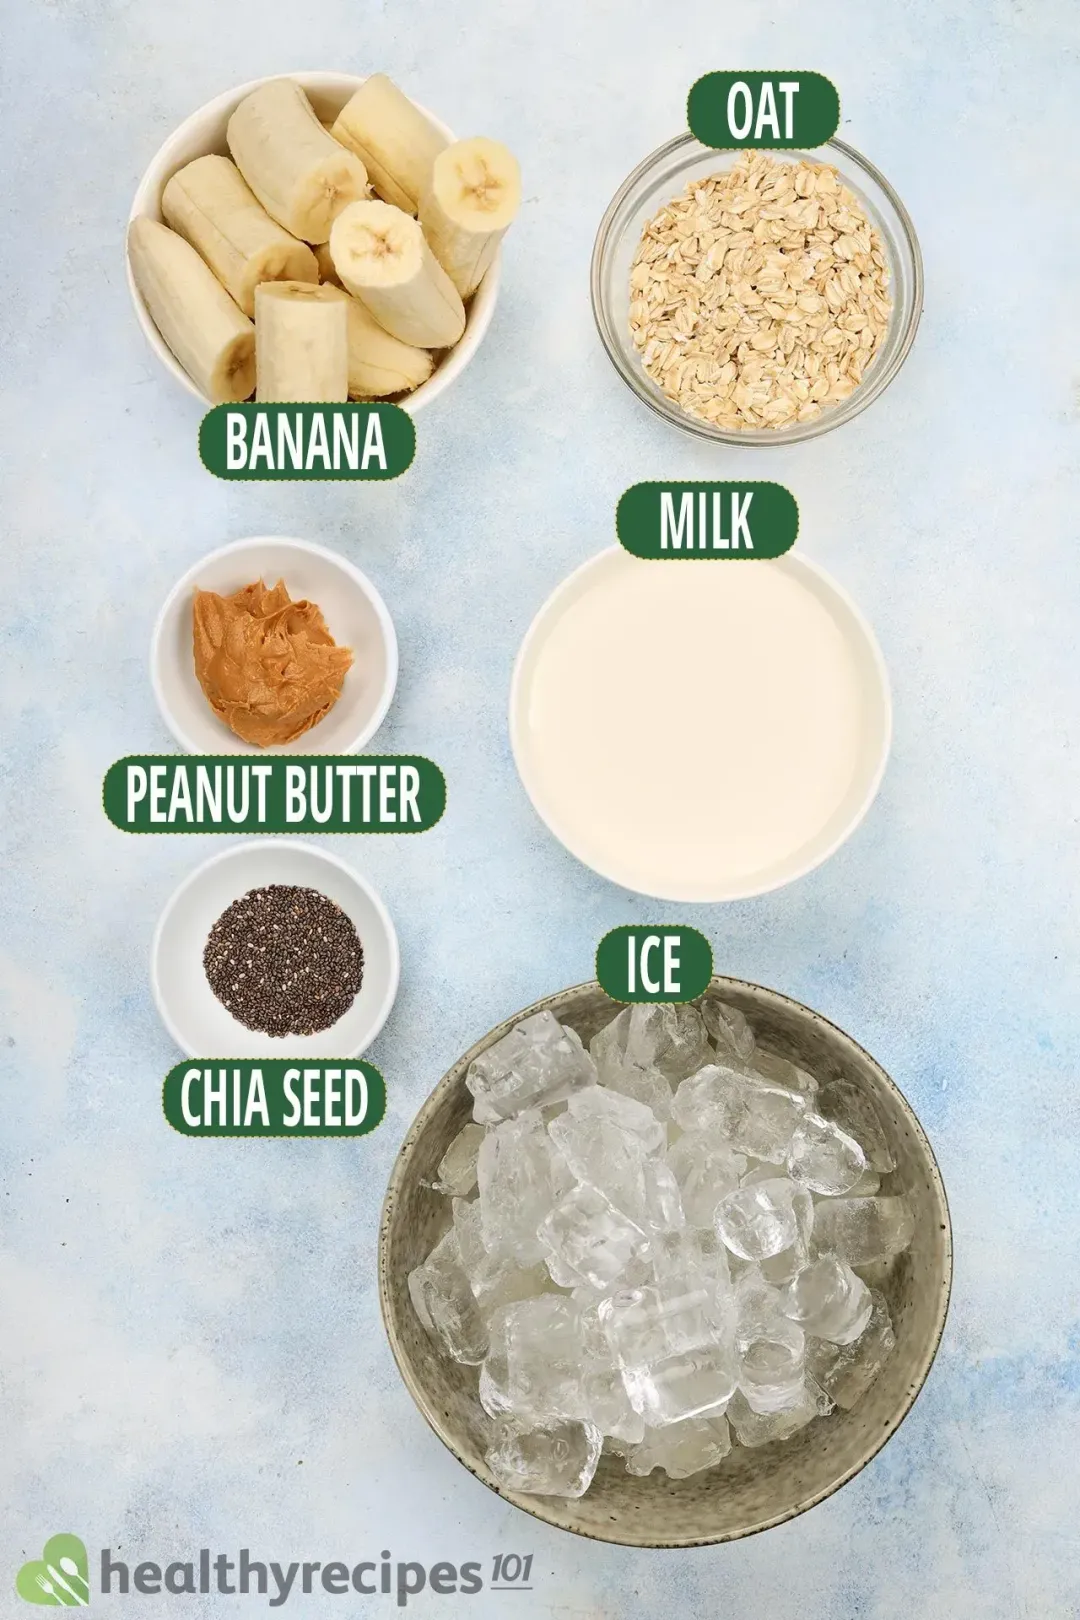 Ingredients for Peanut Butter Oatmeal Smoothie